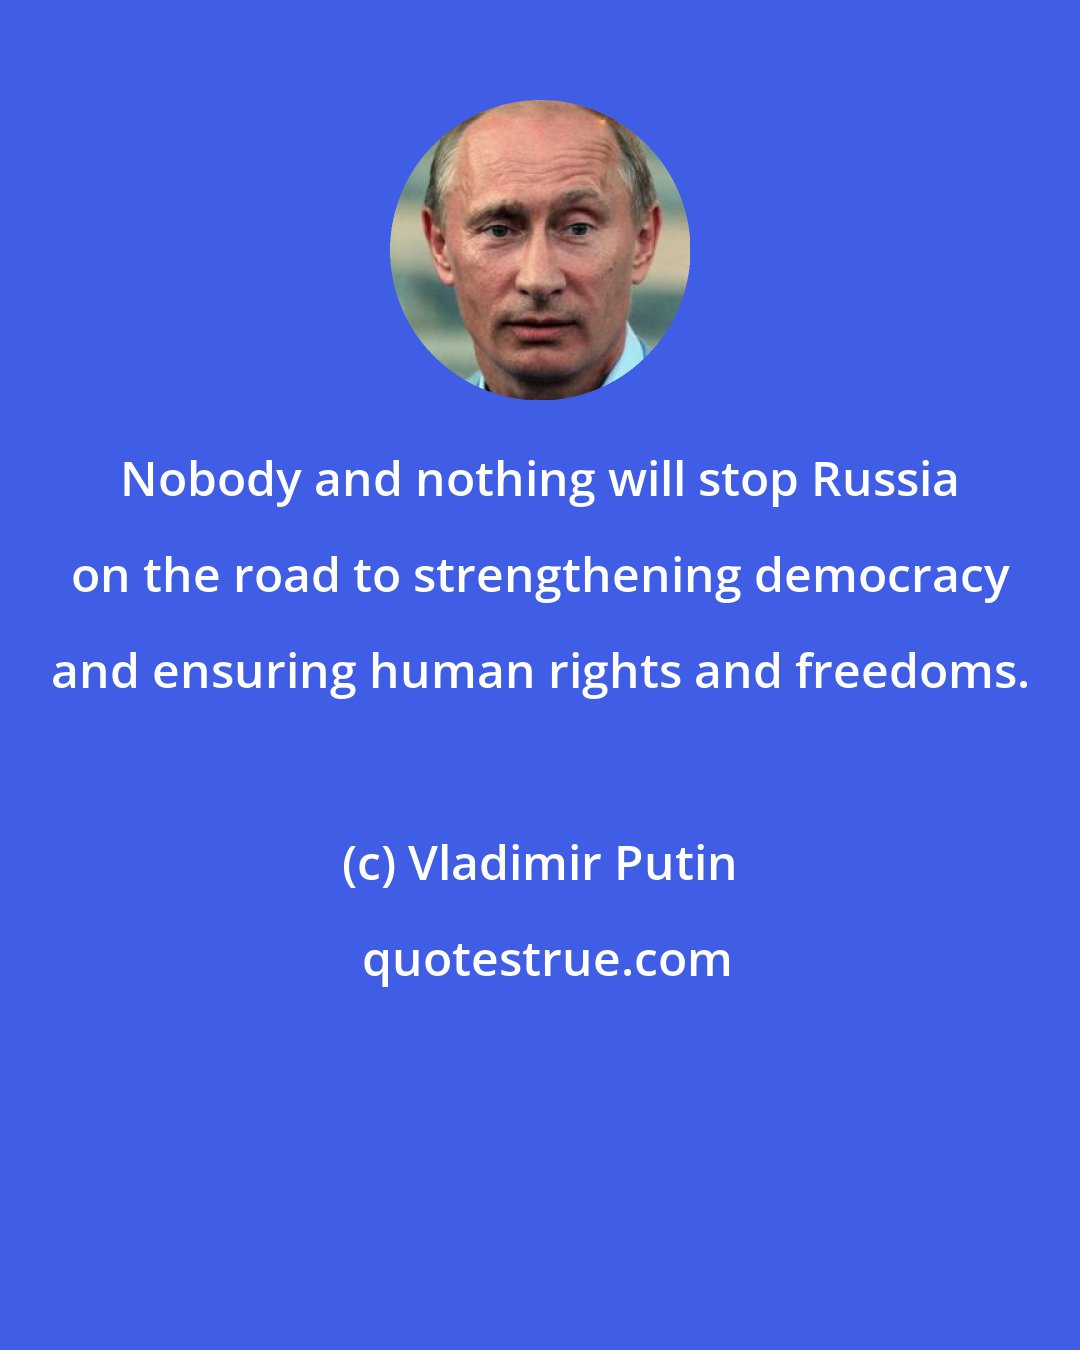 Vladimir Putin: Nobody and nothing will stop Russia on the road to strengthening democracy and ensuring human rights and freedoms.